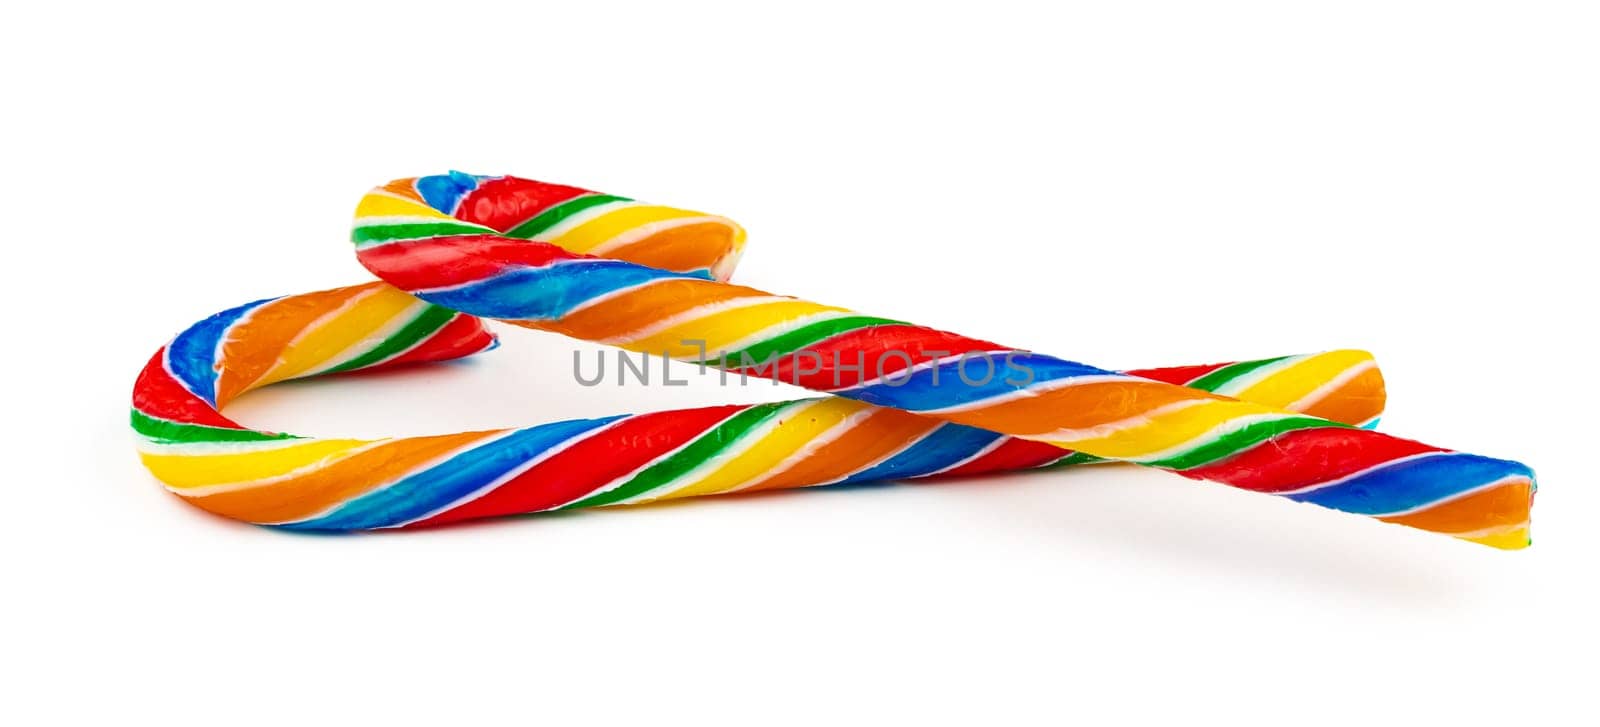 Rainbow colored candy cane isolated on white background